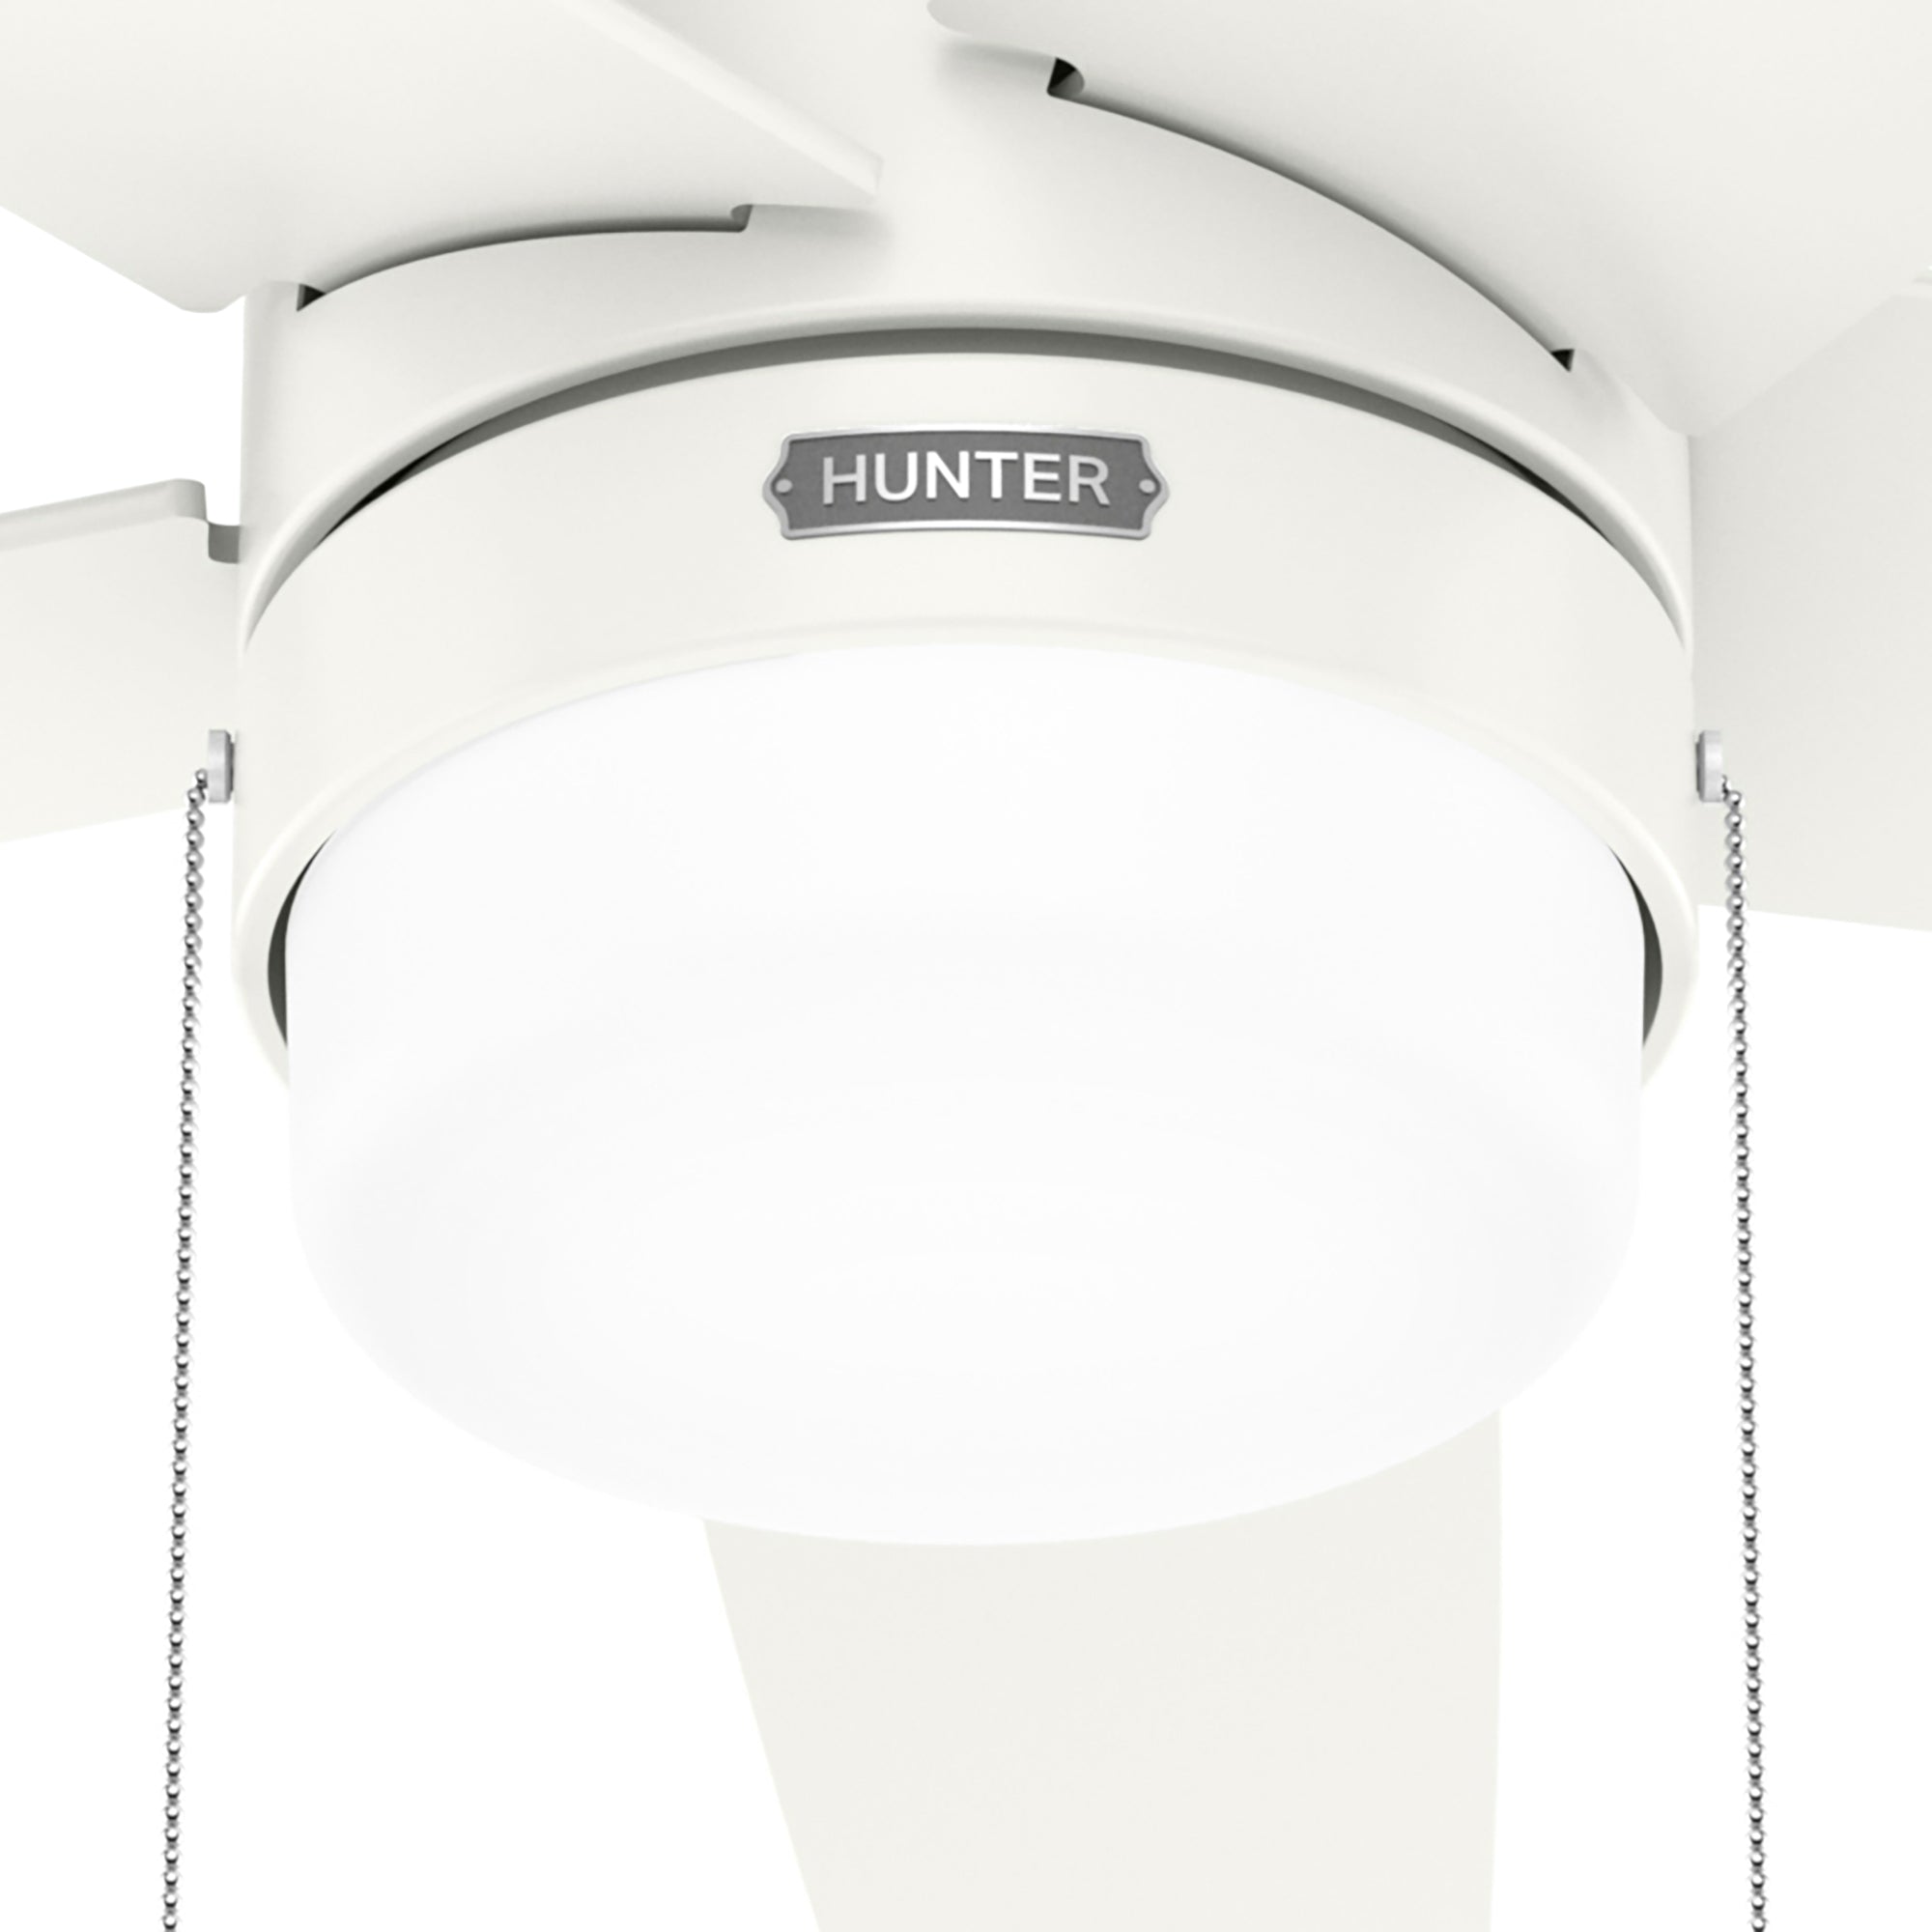 Hunter 44 inch Bardot Ceiling Fan with LED Light Kit and Pull Chain